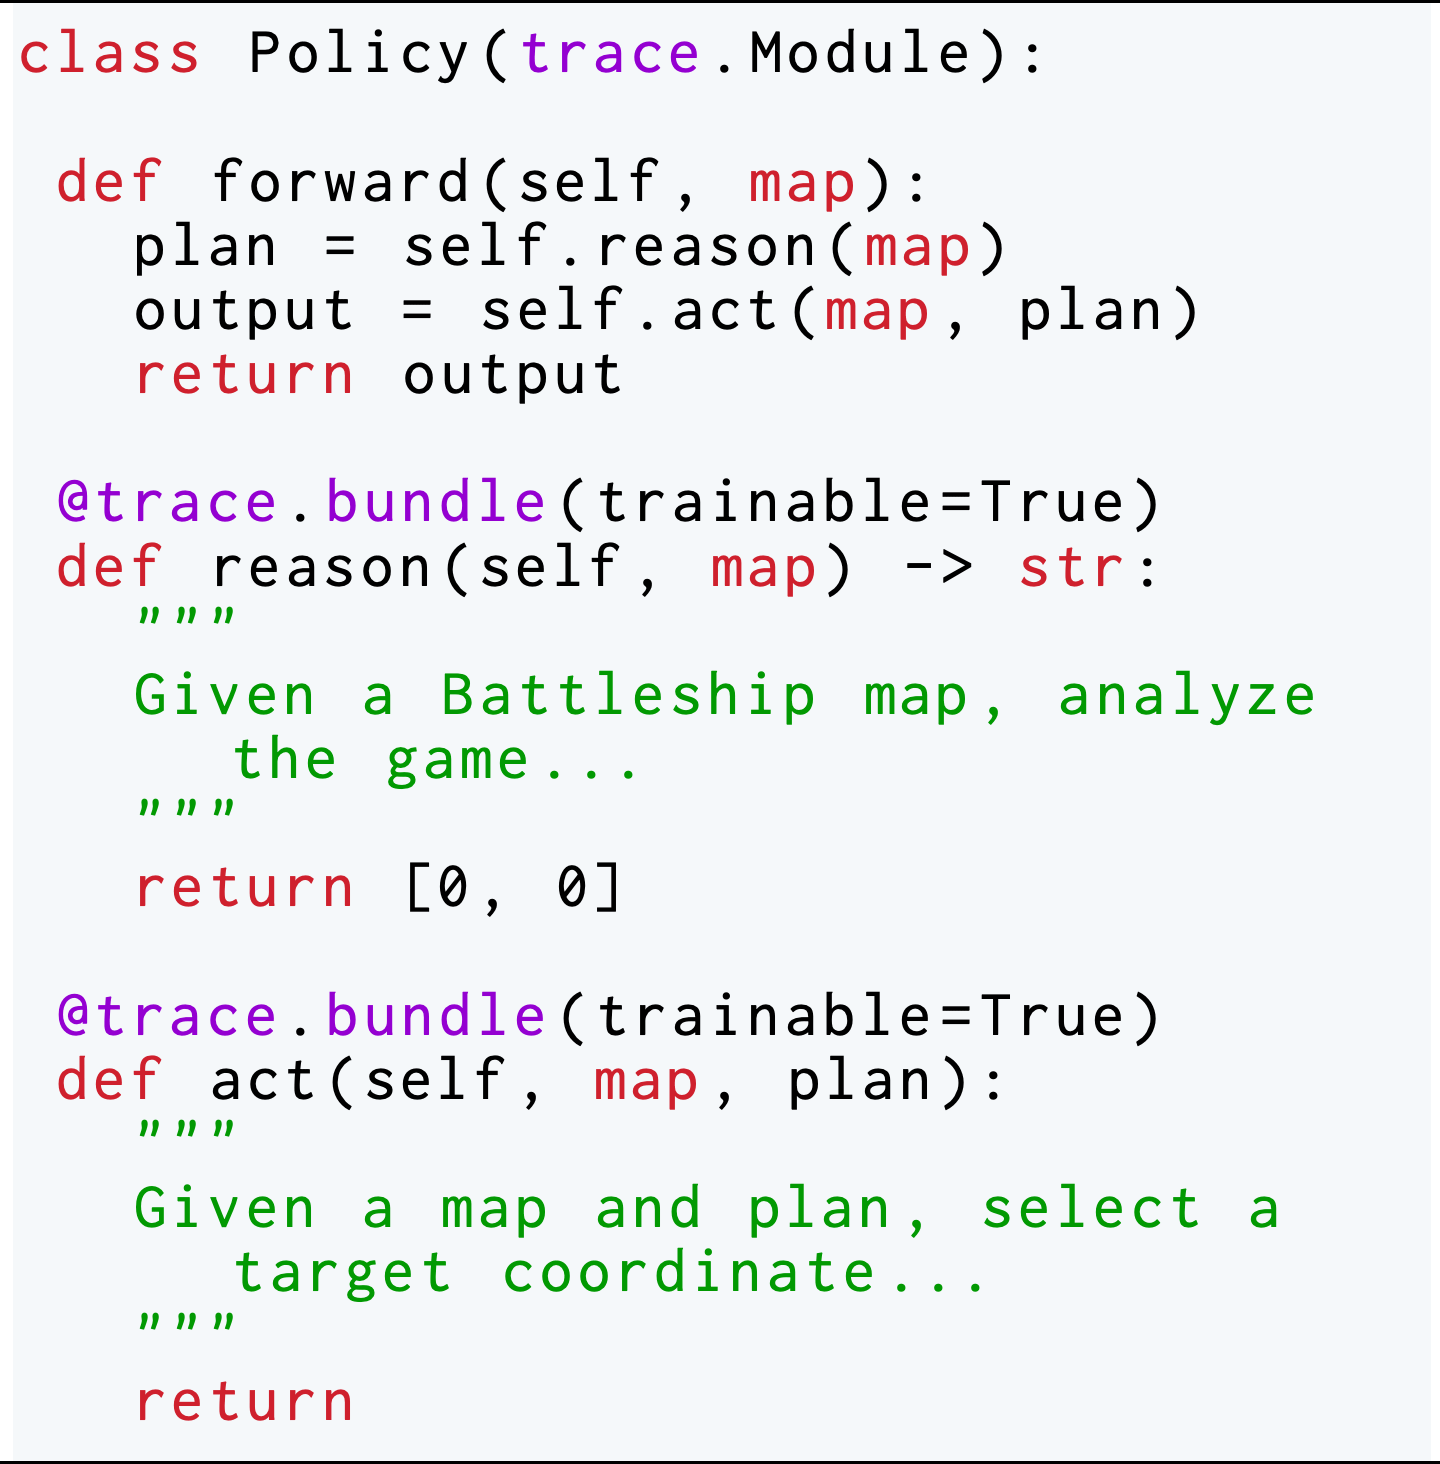 The agent’s policy is defined as the composition of a reason step and an act step. The codes of both steps are marked as trainable and are initialized as trivial functions. A basic description of what each function is supposed to behave is provided as docstrings in the function definition. 